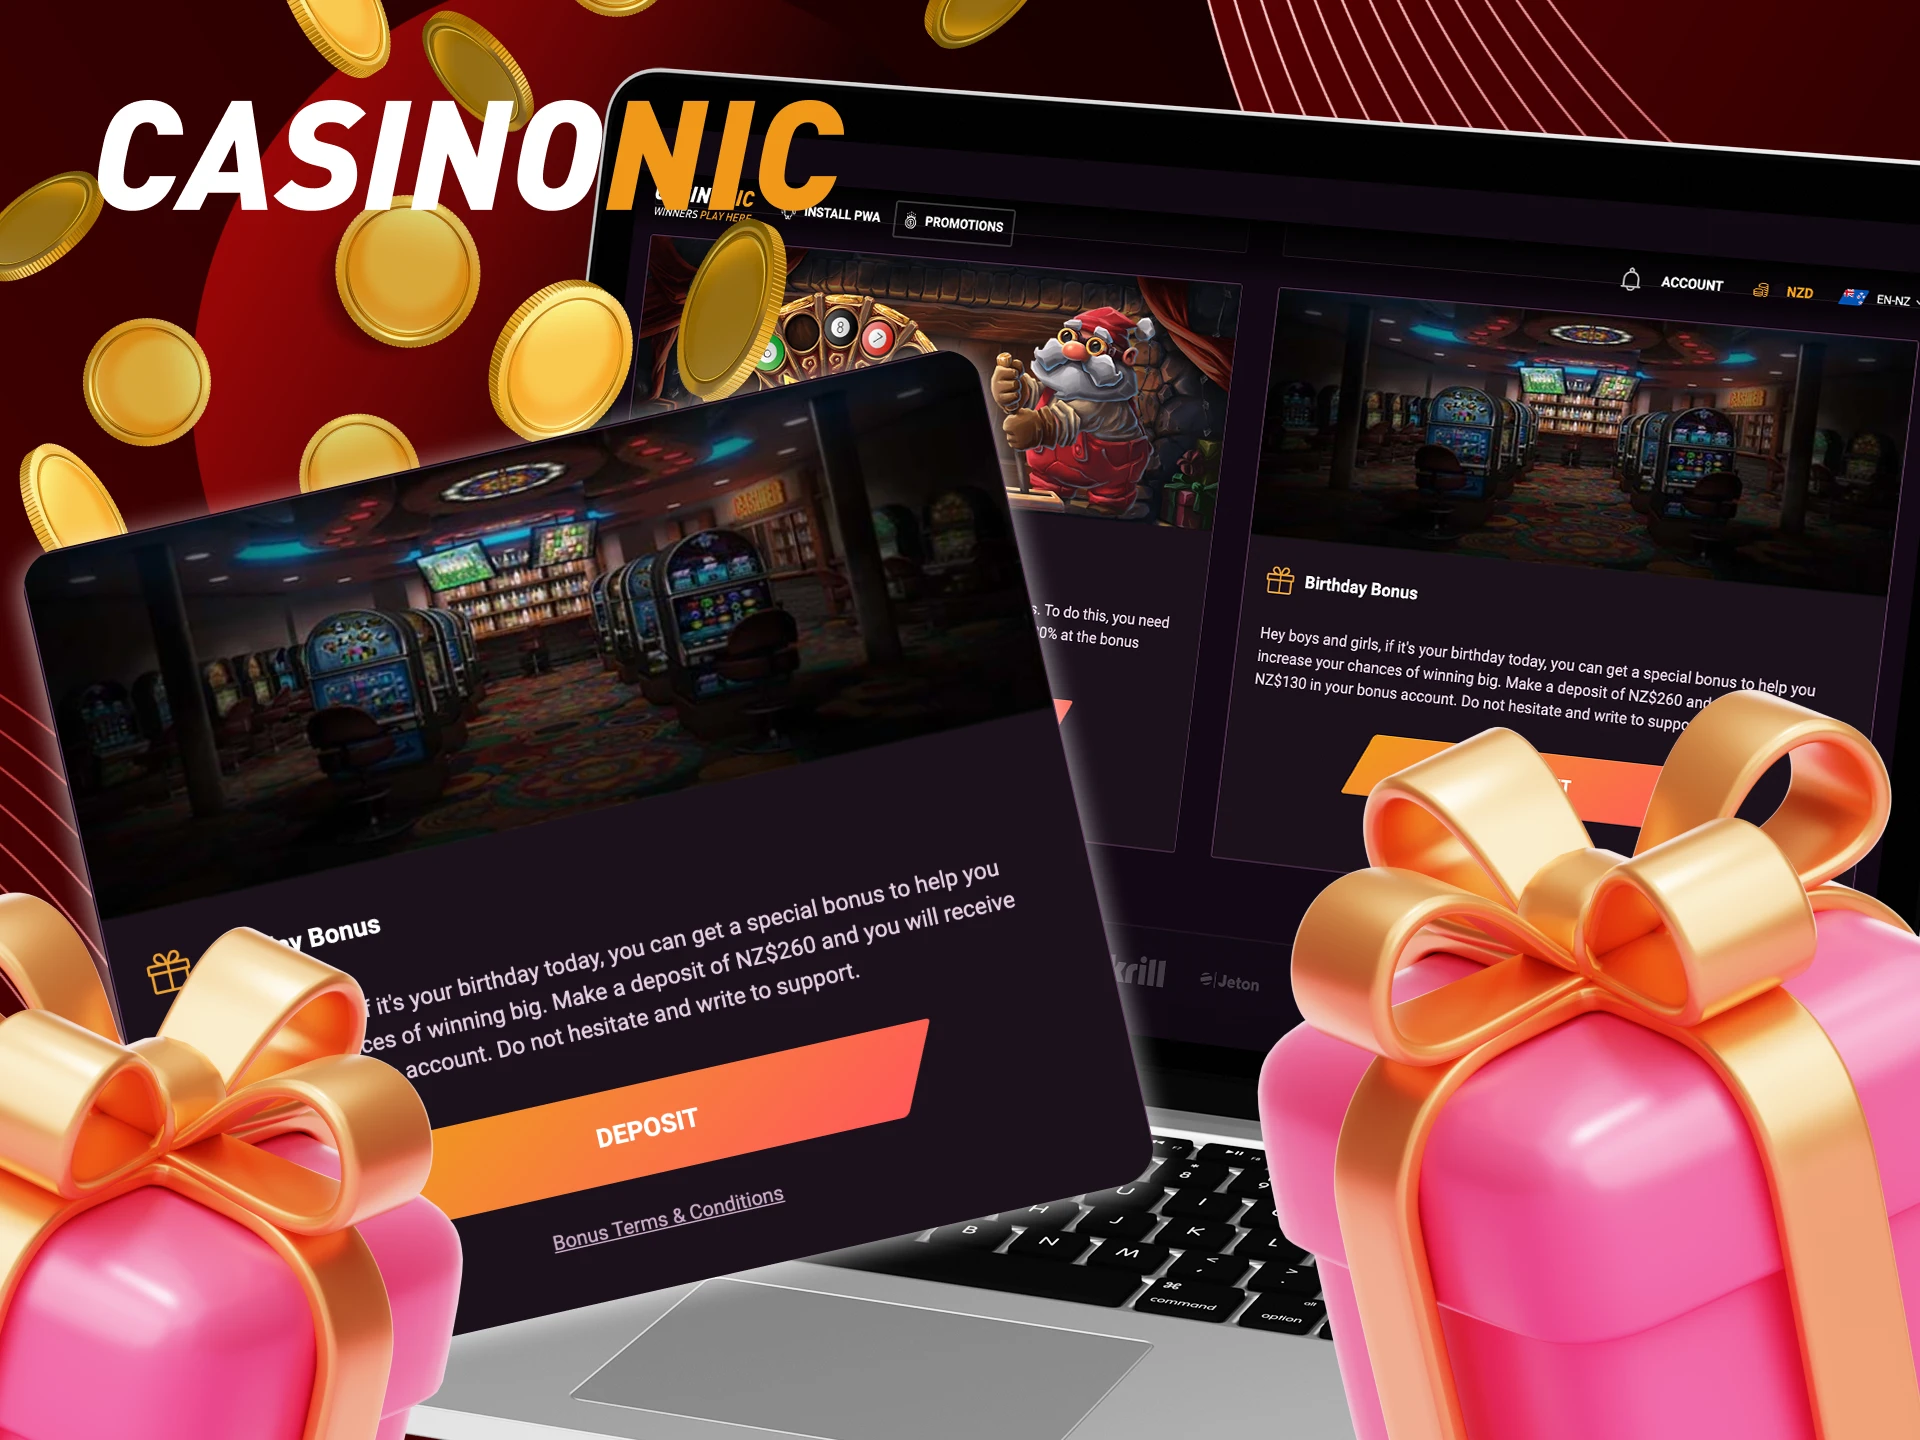 What birthday bonuses are there at CasinoNic online casino.